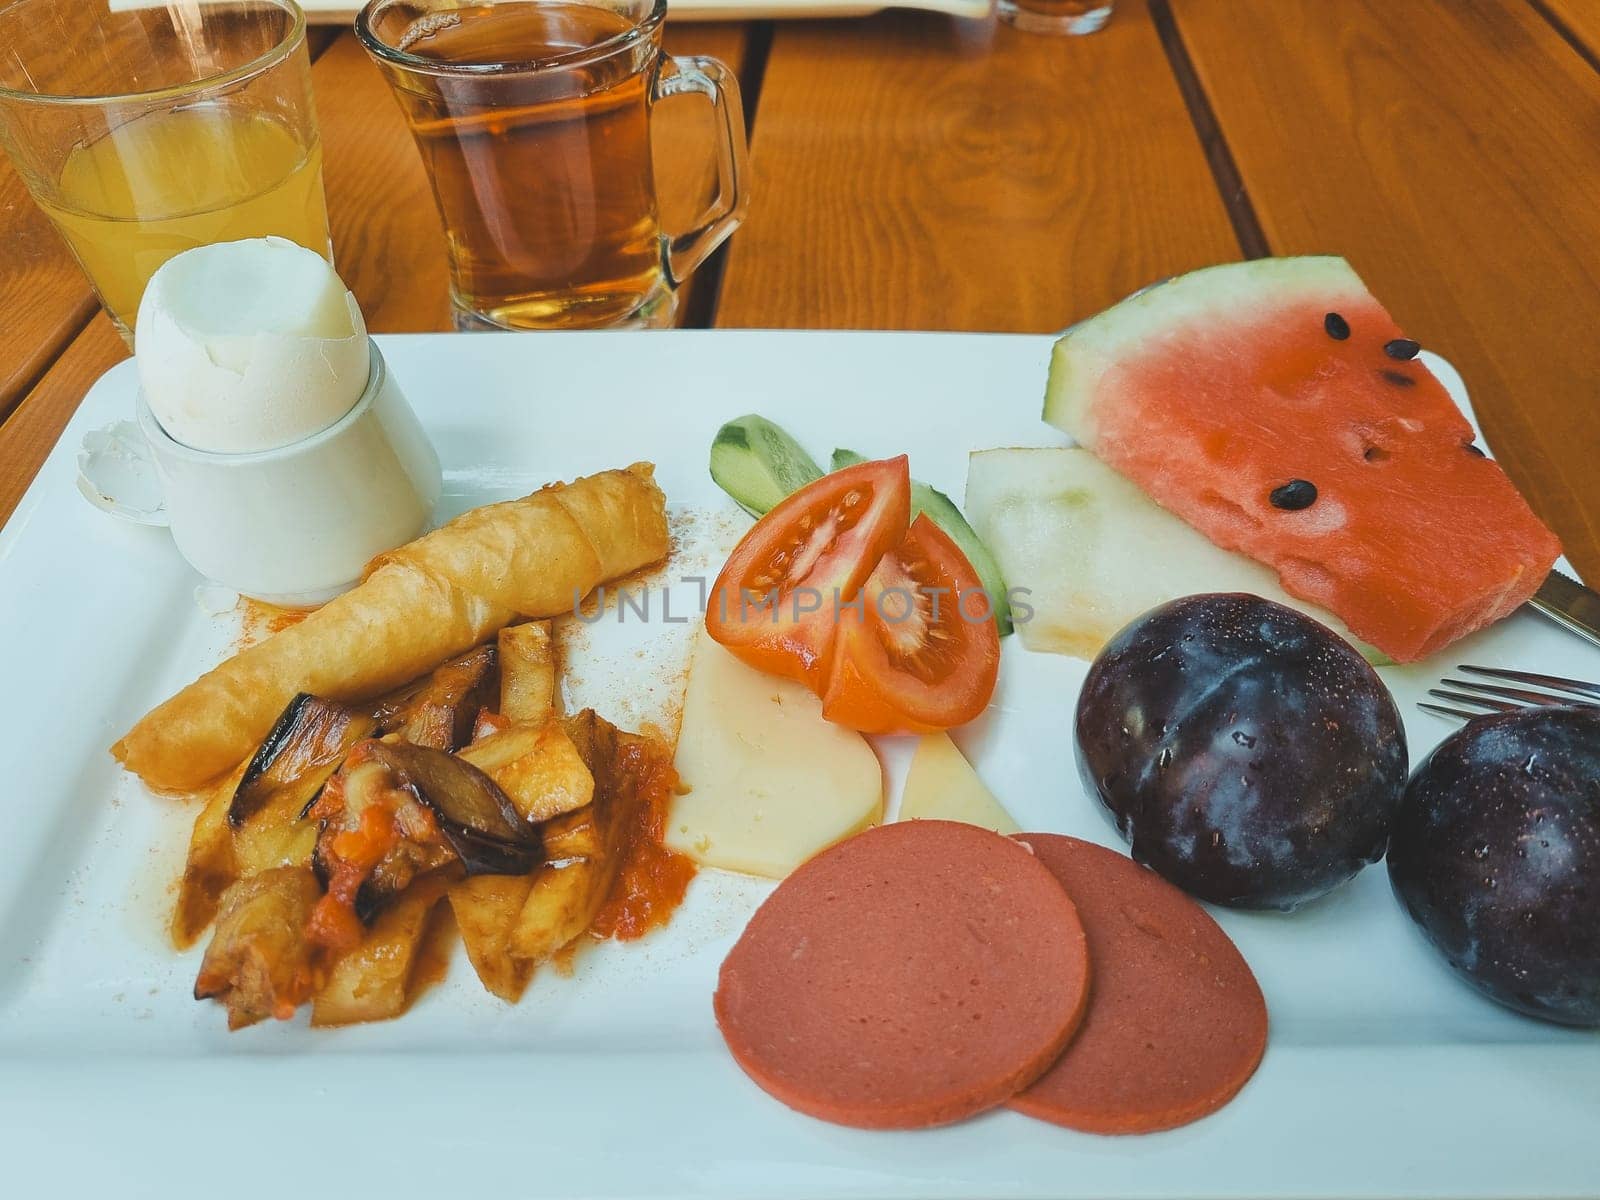 Turkish breakfast. boiled egg, sausage, cheese, vegetables, fruits, orange juice and tea. pieces of watermelon tomato cucumber plum